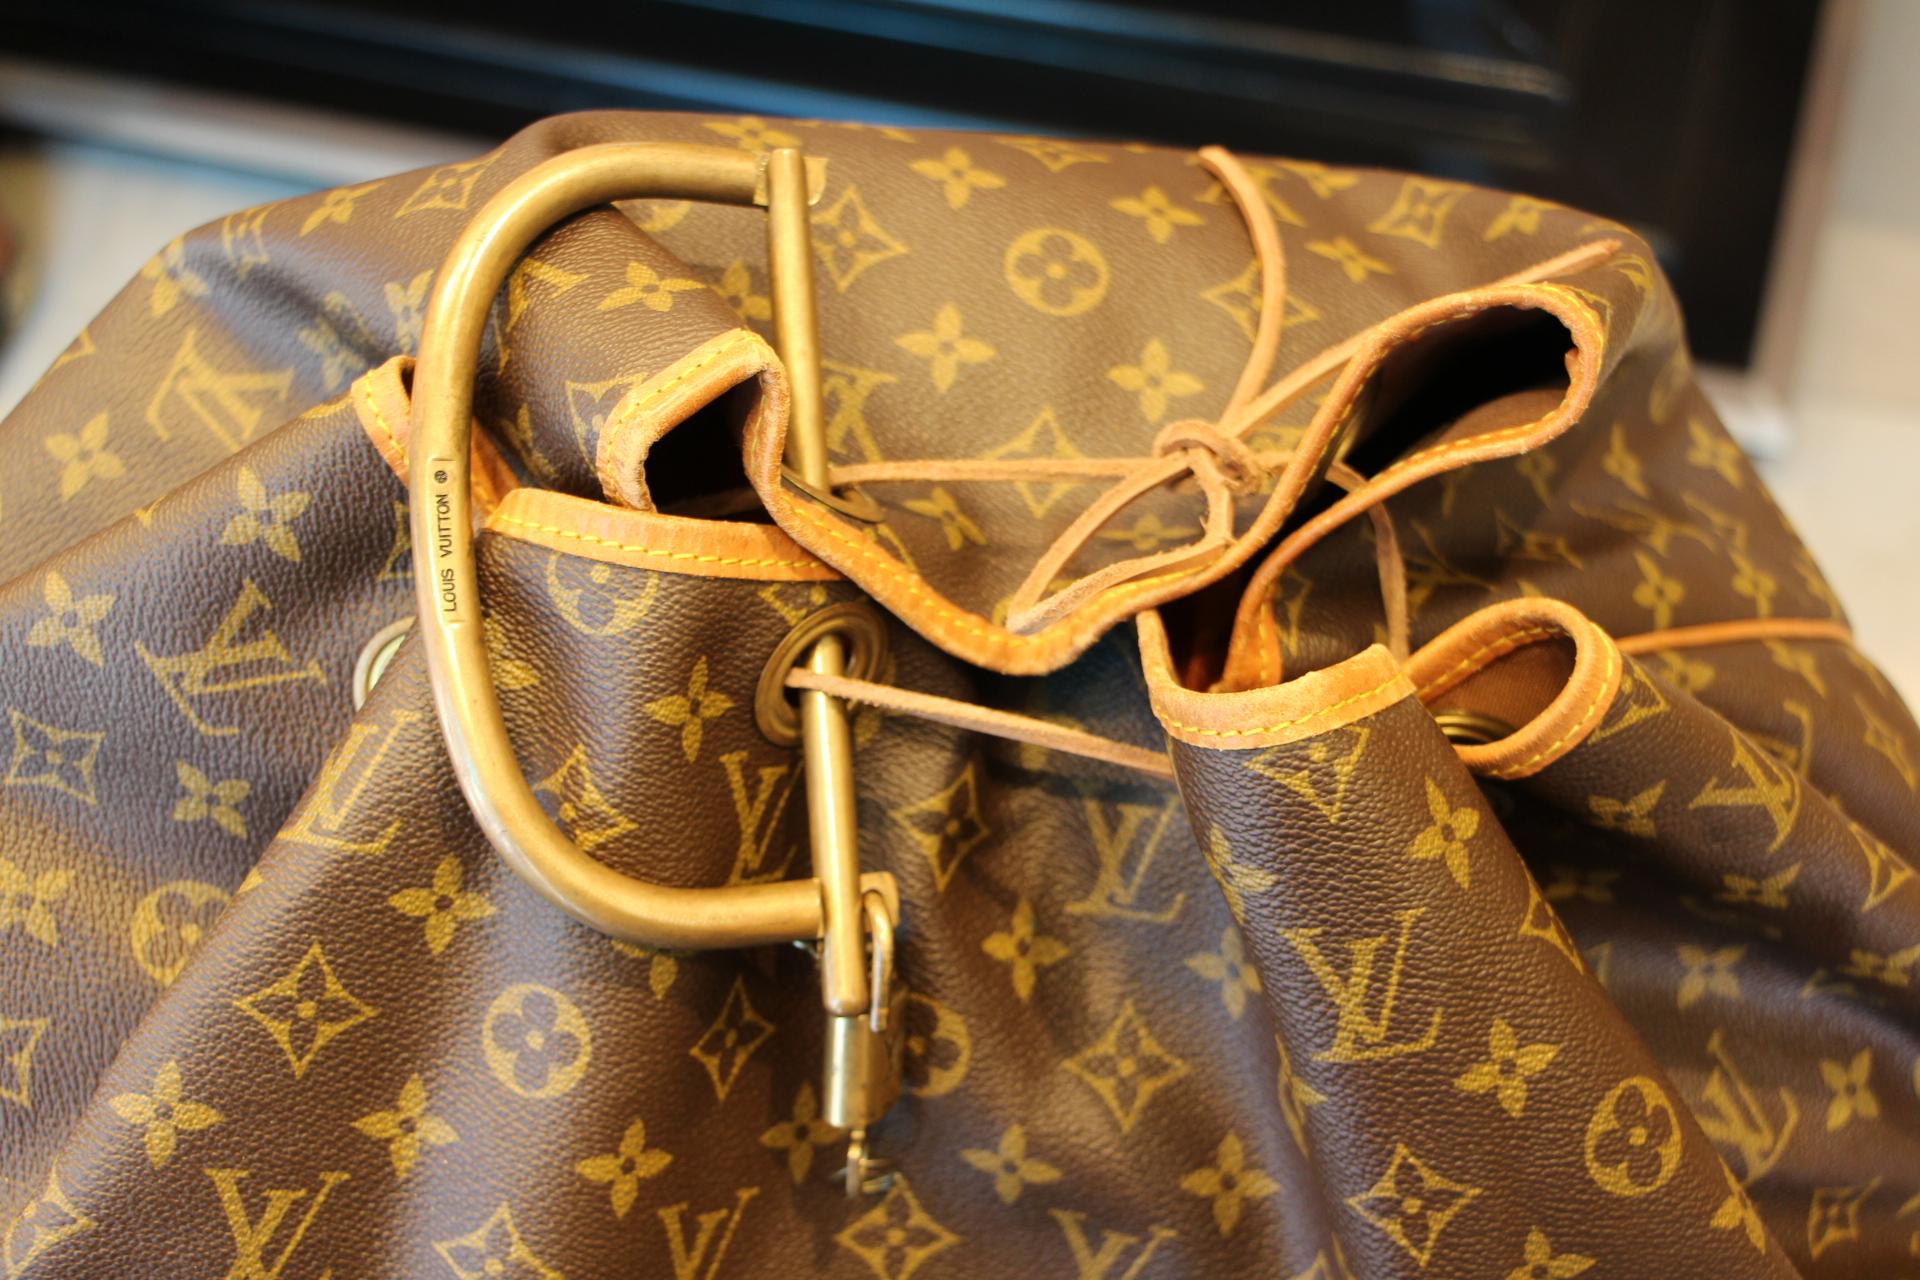 This impressive 1970s Louis Vuitton bag features monogram canvas in very good condition, its leather part has very few stains and scratches. Its interior is in very good condition too.
It comes with a replaced leather string, a solid LV brass handle